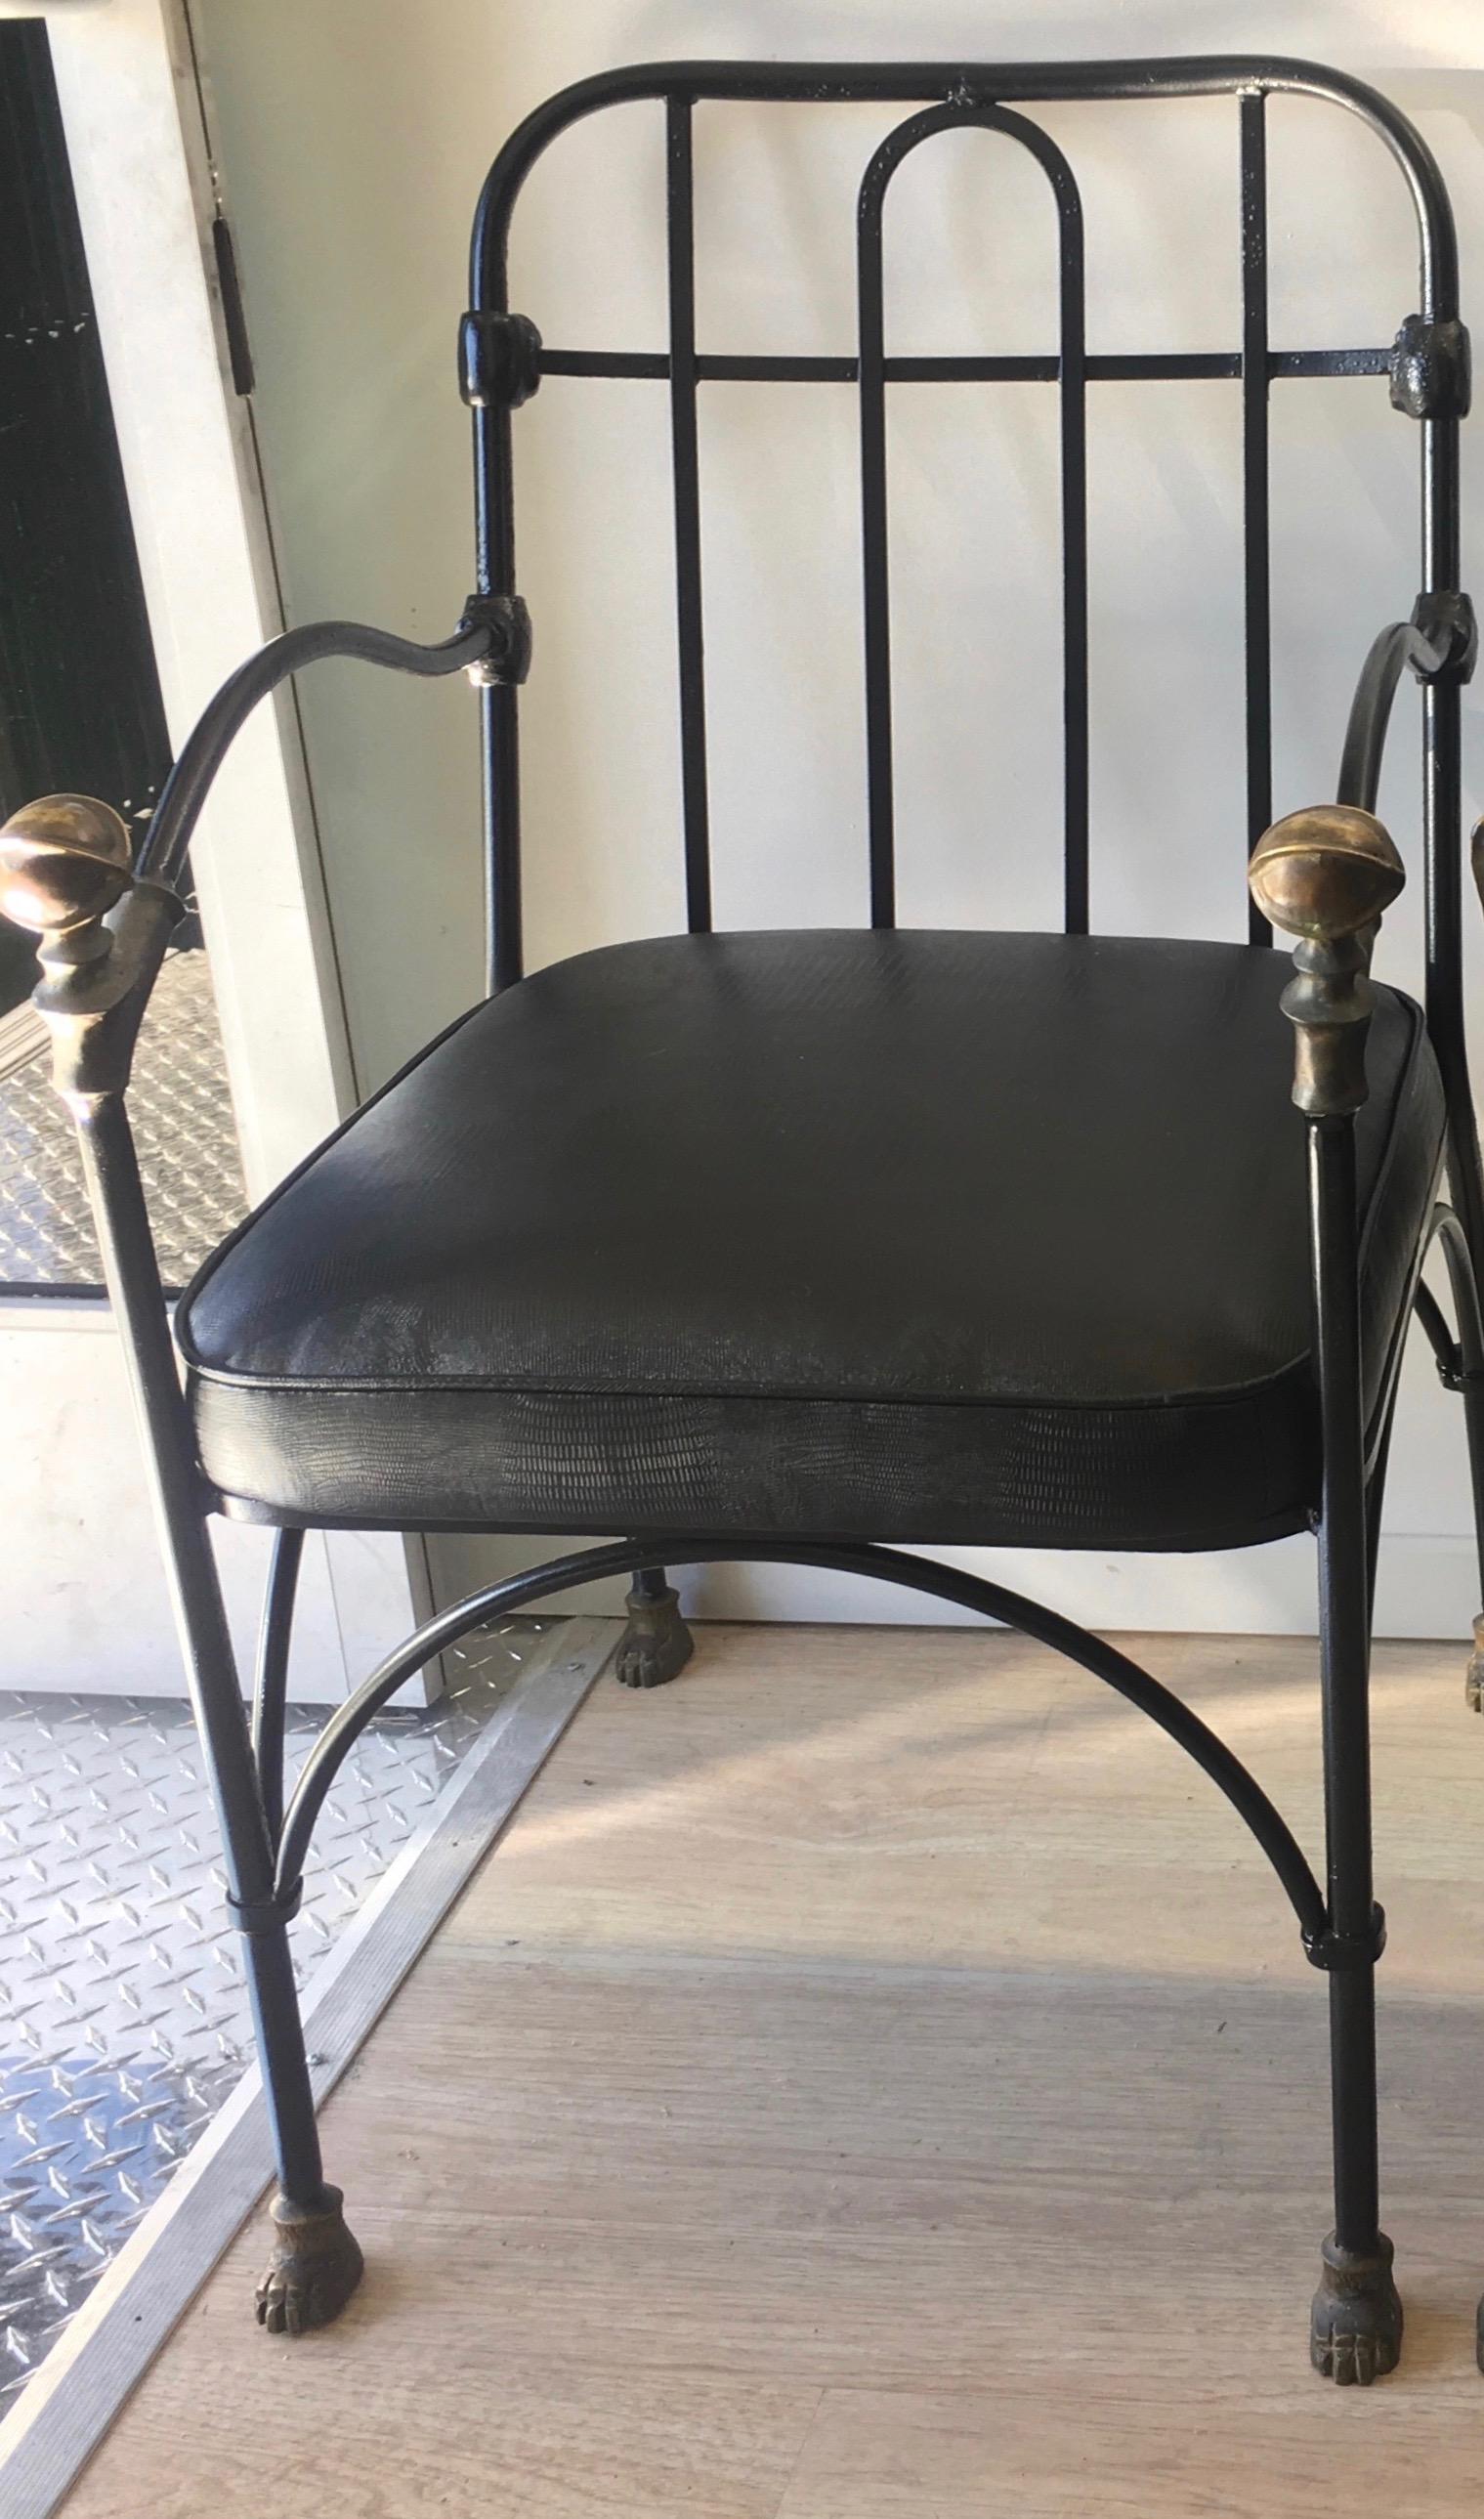 Wrought iron chair with bronze lion head detail - currently available as a pair on the site, we will sell individually per popular demand. Our other chair has a ball detail rather than lion... images are mixed to show both. A handsome chair freshly